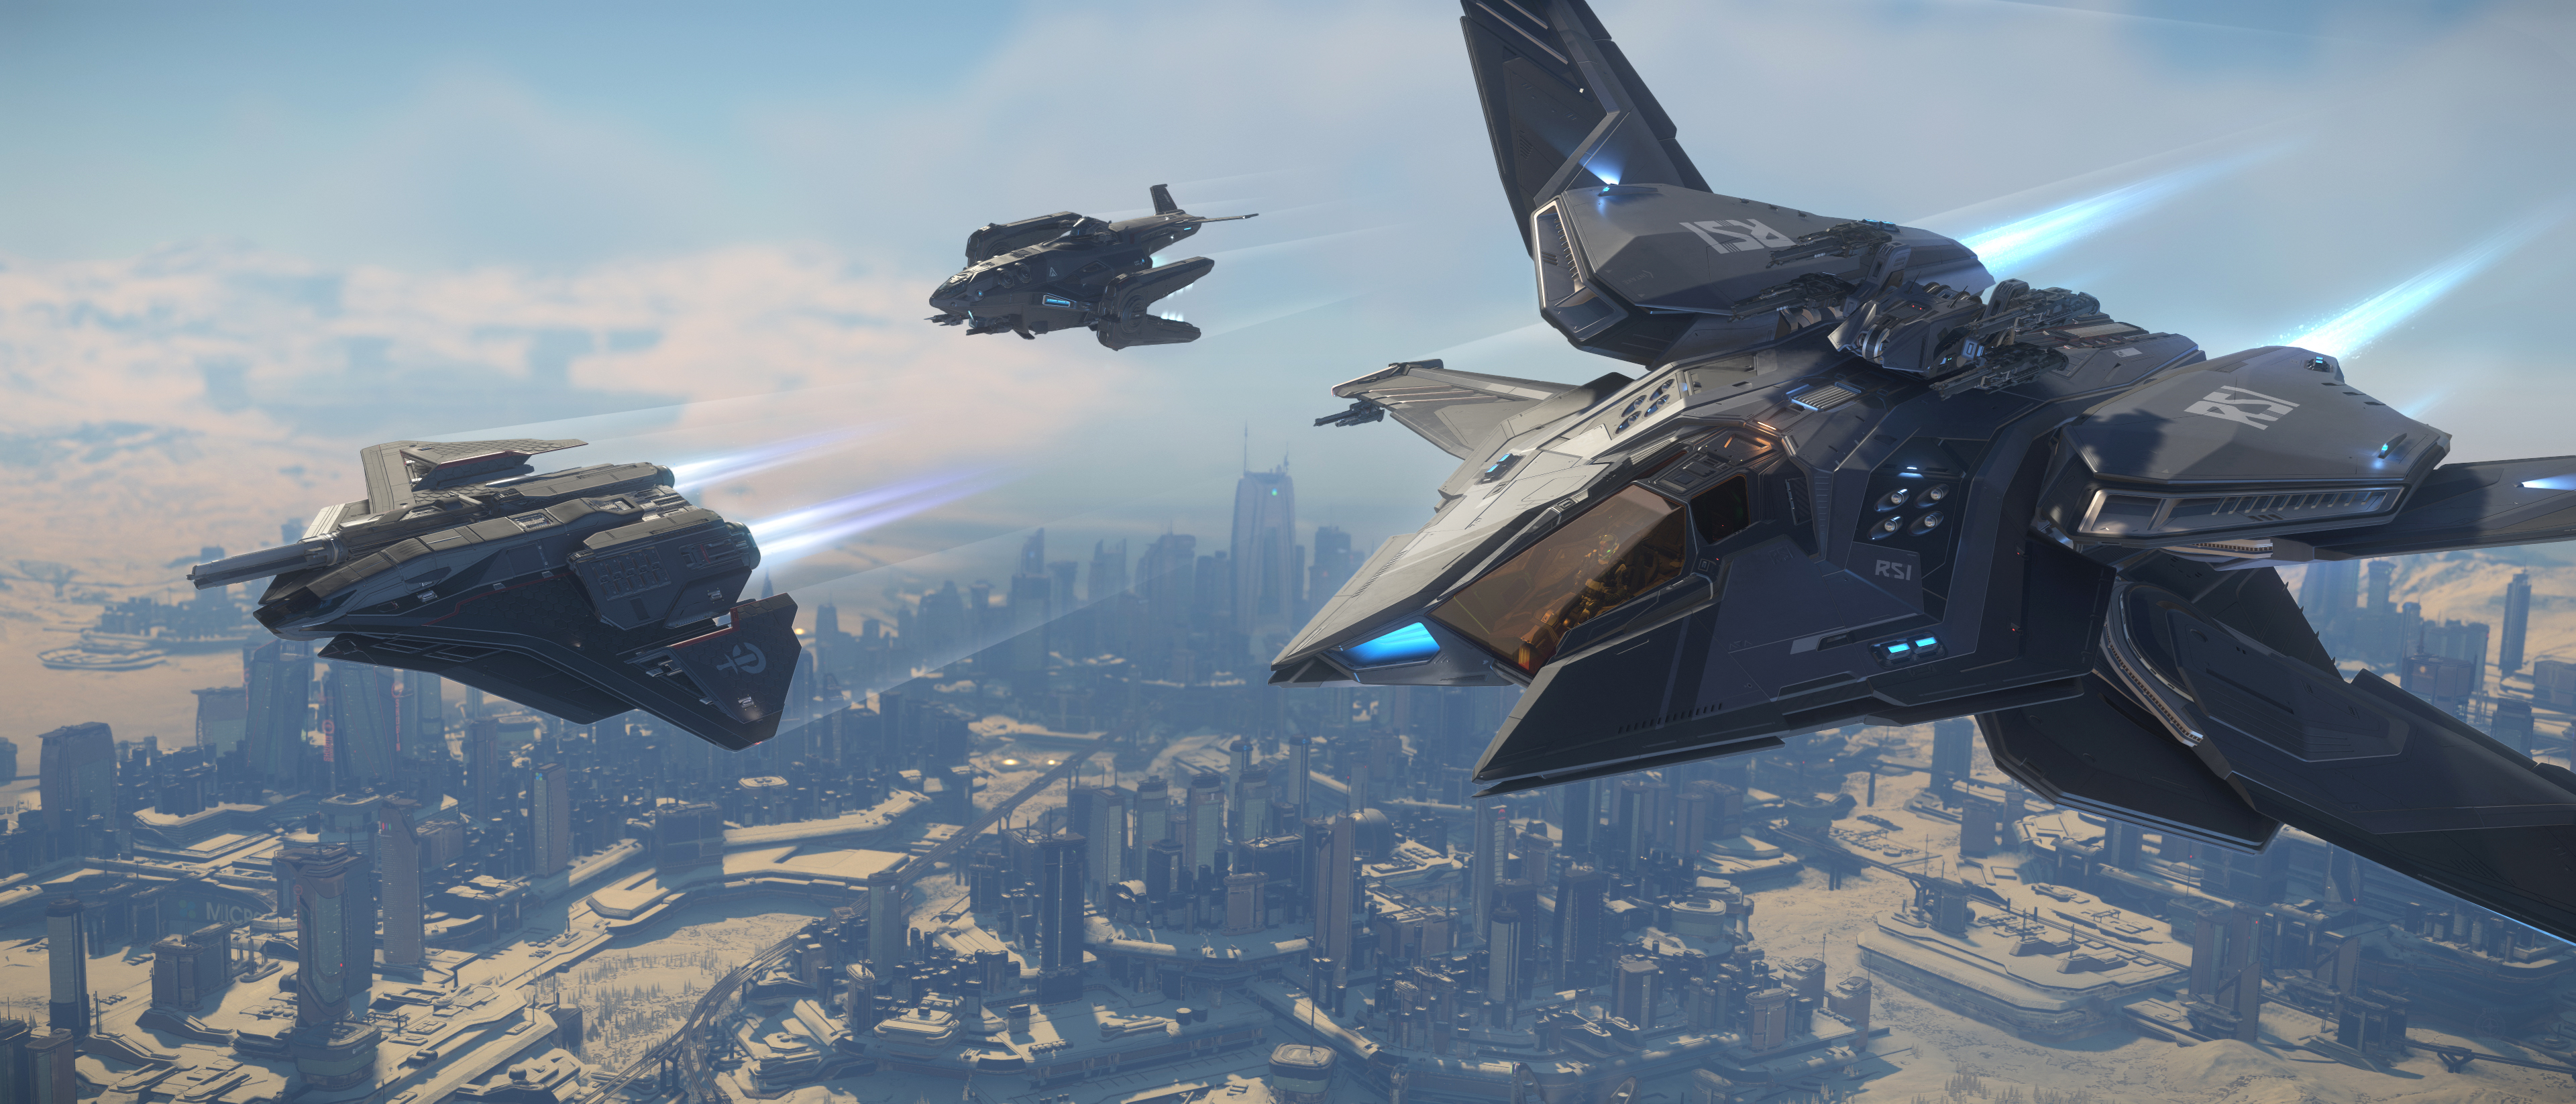 Star Citizen Announces The Return Of Its Invictus Launch Week Free-Fly  Event 